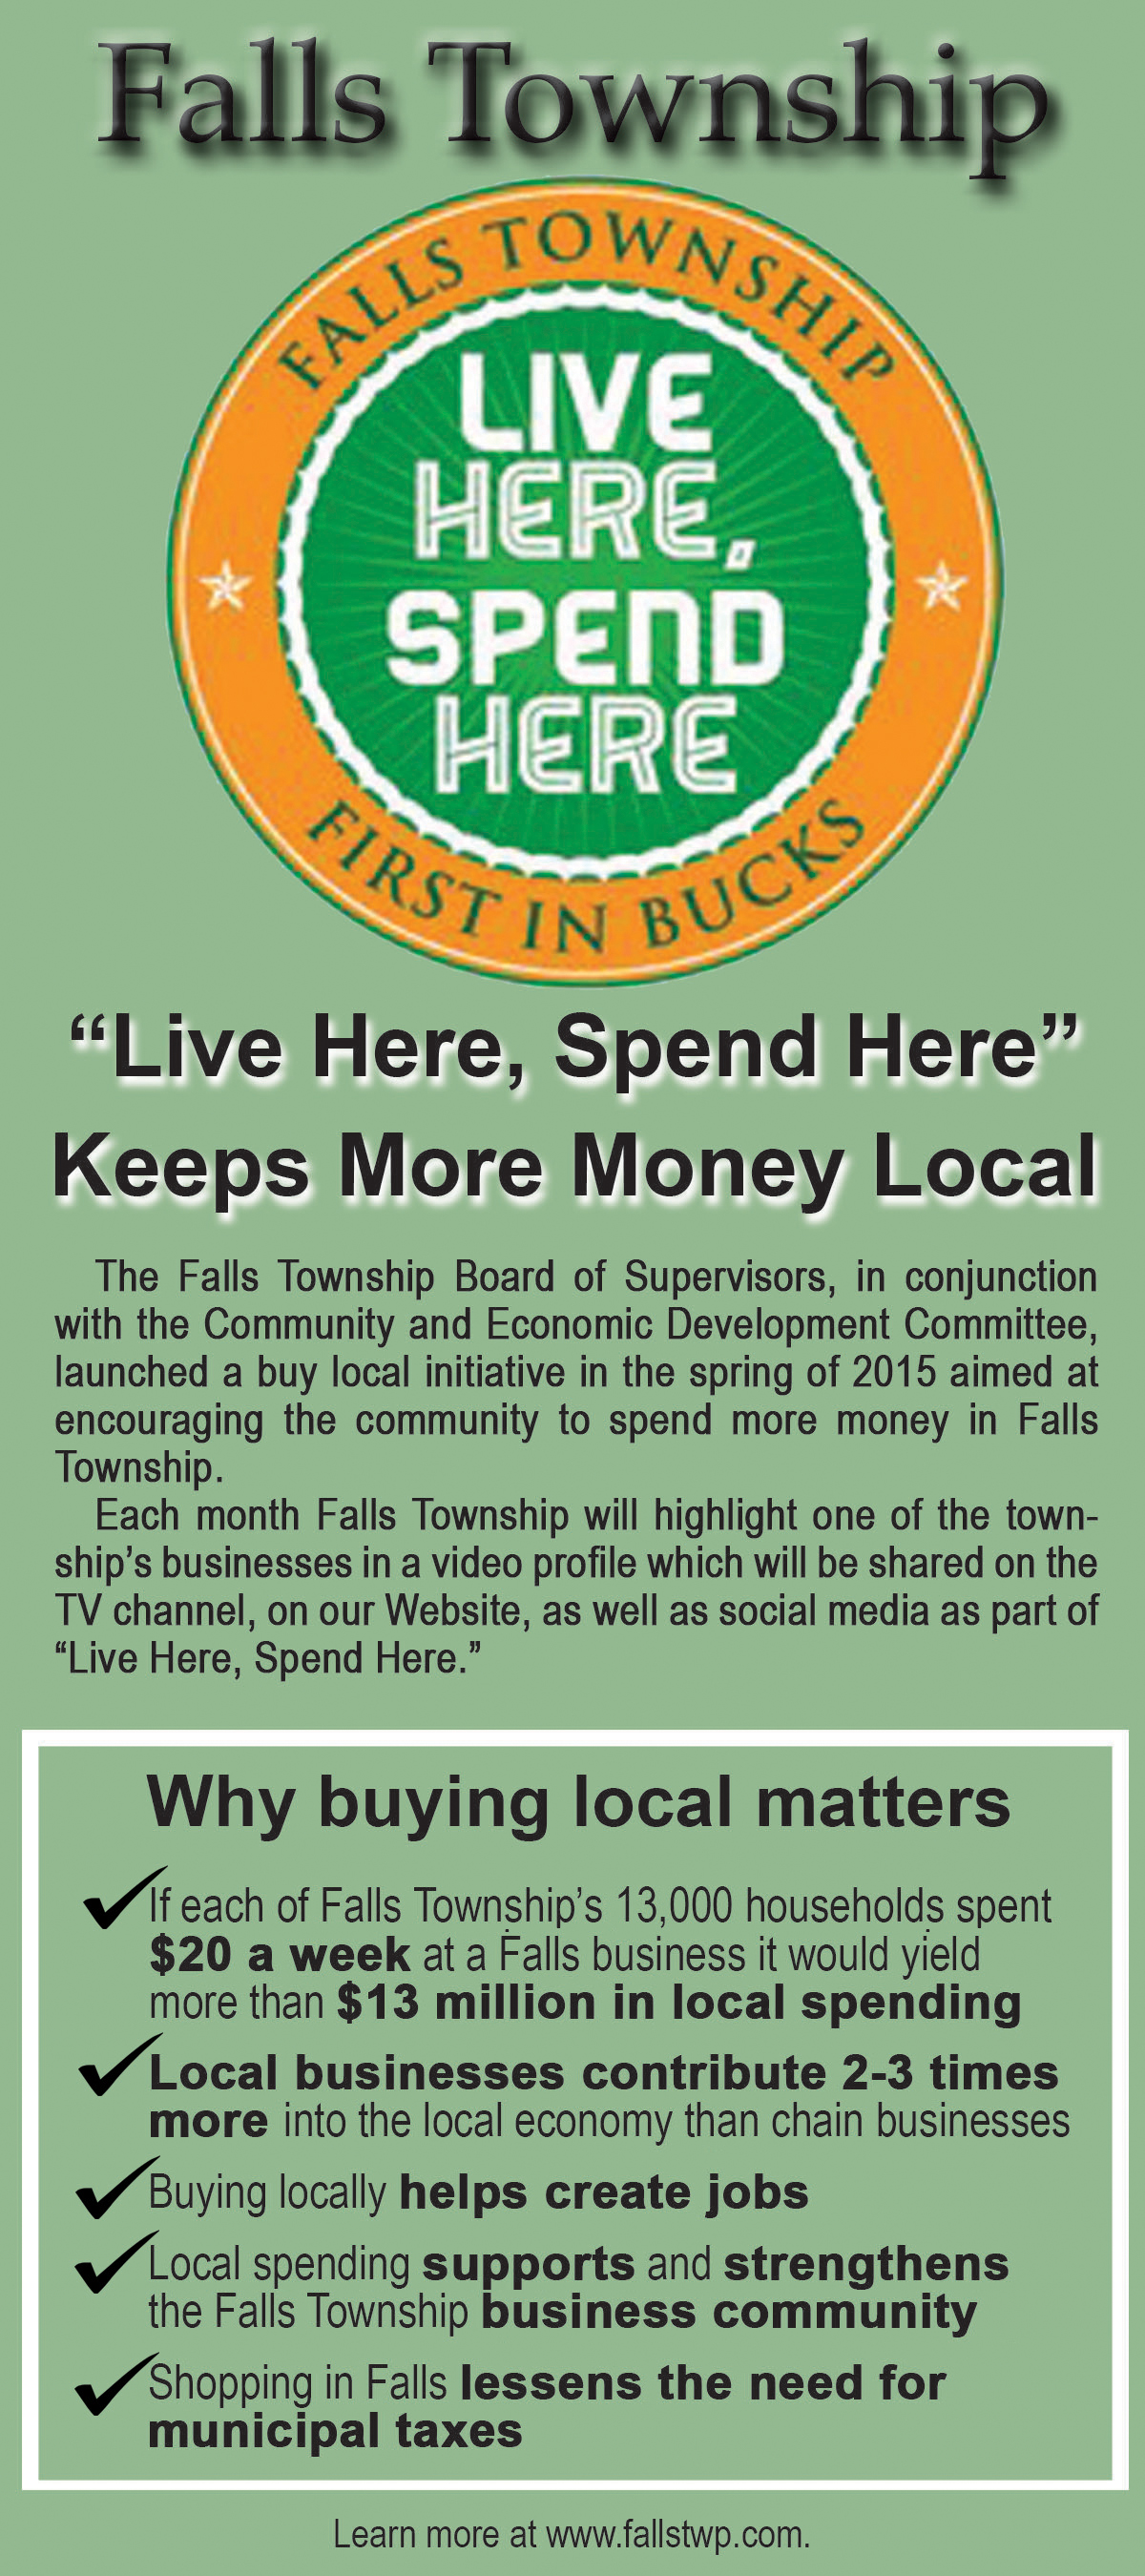 Katalinas Communications designed this rack card for Falls Township, which highlights the township's Live Here, Spend Here effort.